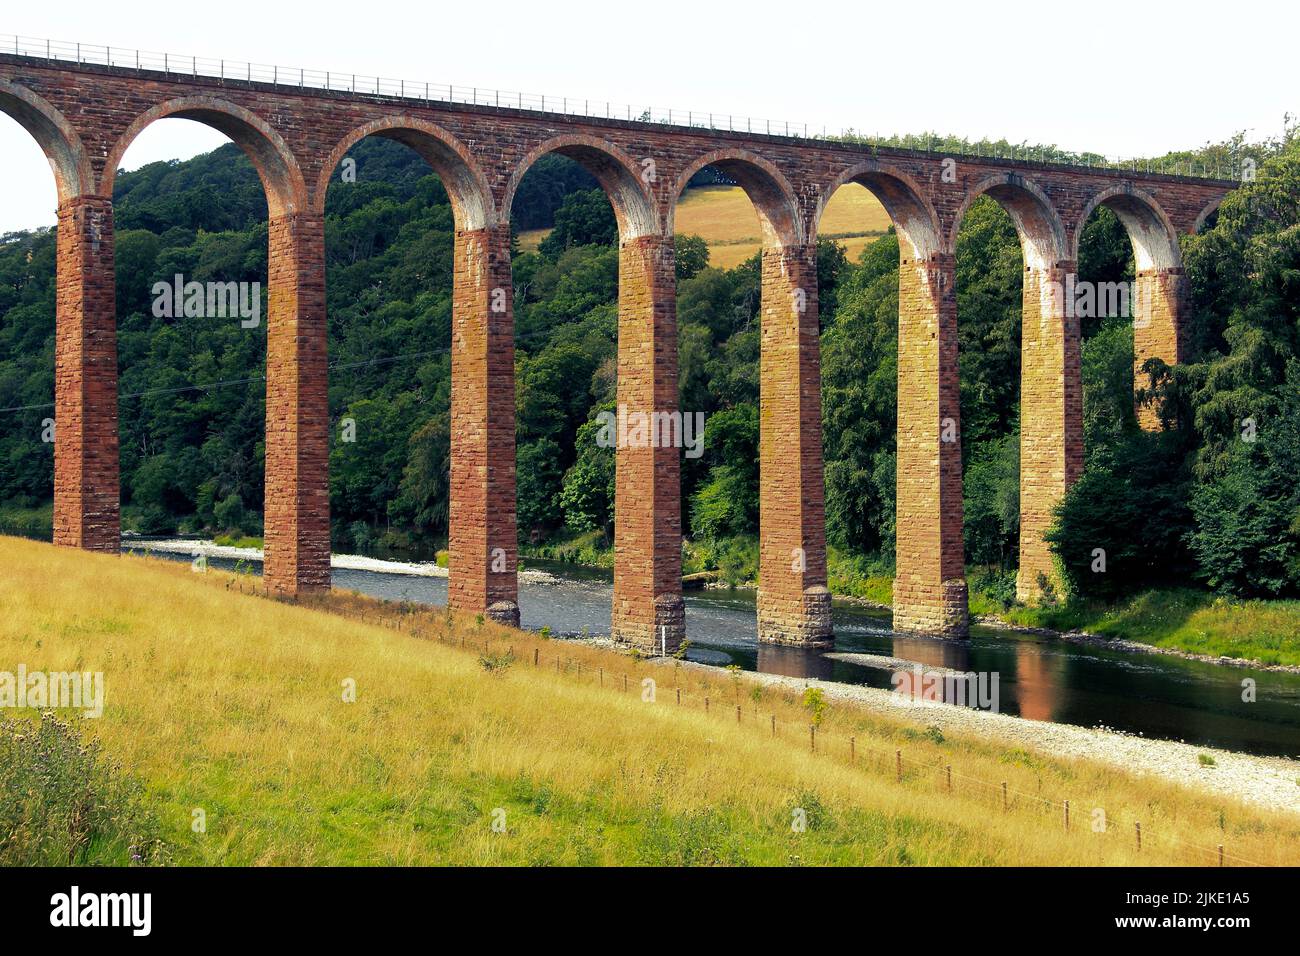 Leaderfoot Viaduct over the River Tweed, Melrose, Scottish Borders, Scotland, UK Stock Photo